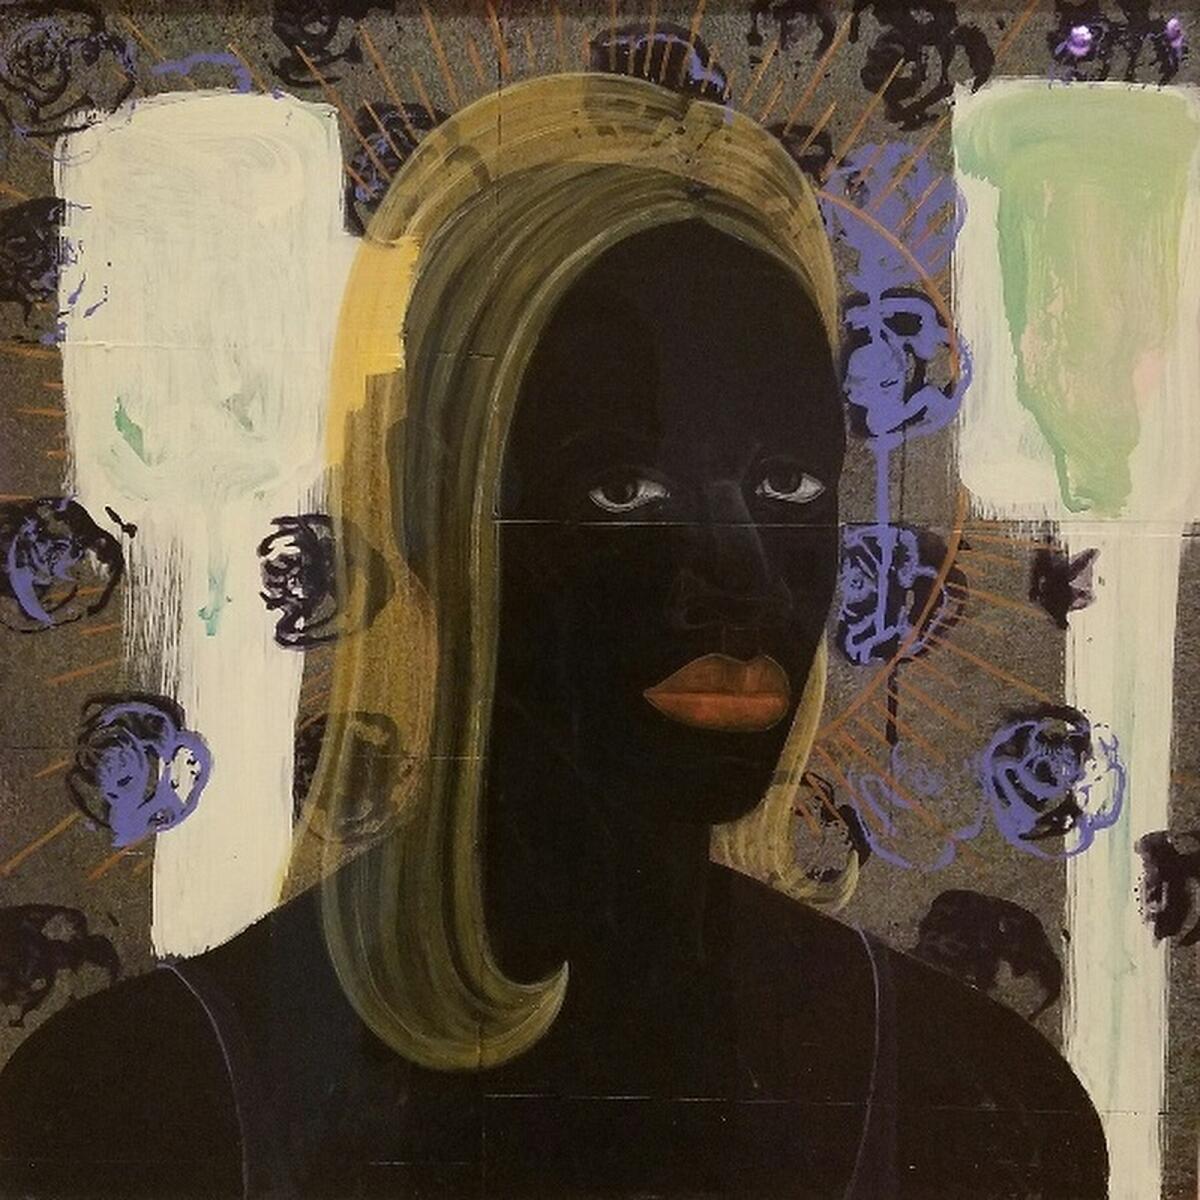 Kerry James Marshall, "Self-Portrait of the Artist as a Super Model," 1994, acrylic and collage on board (MOCA)